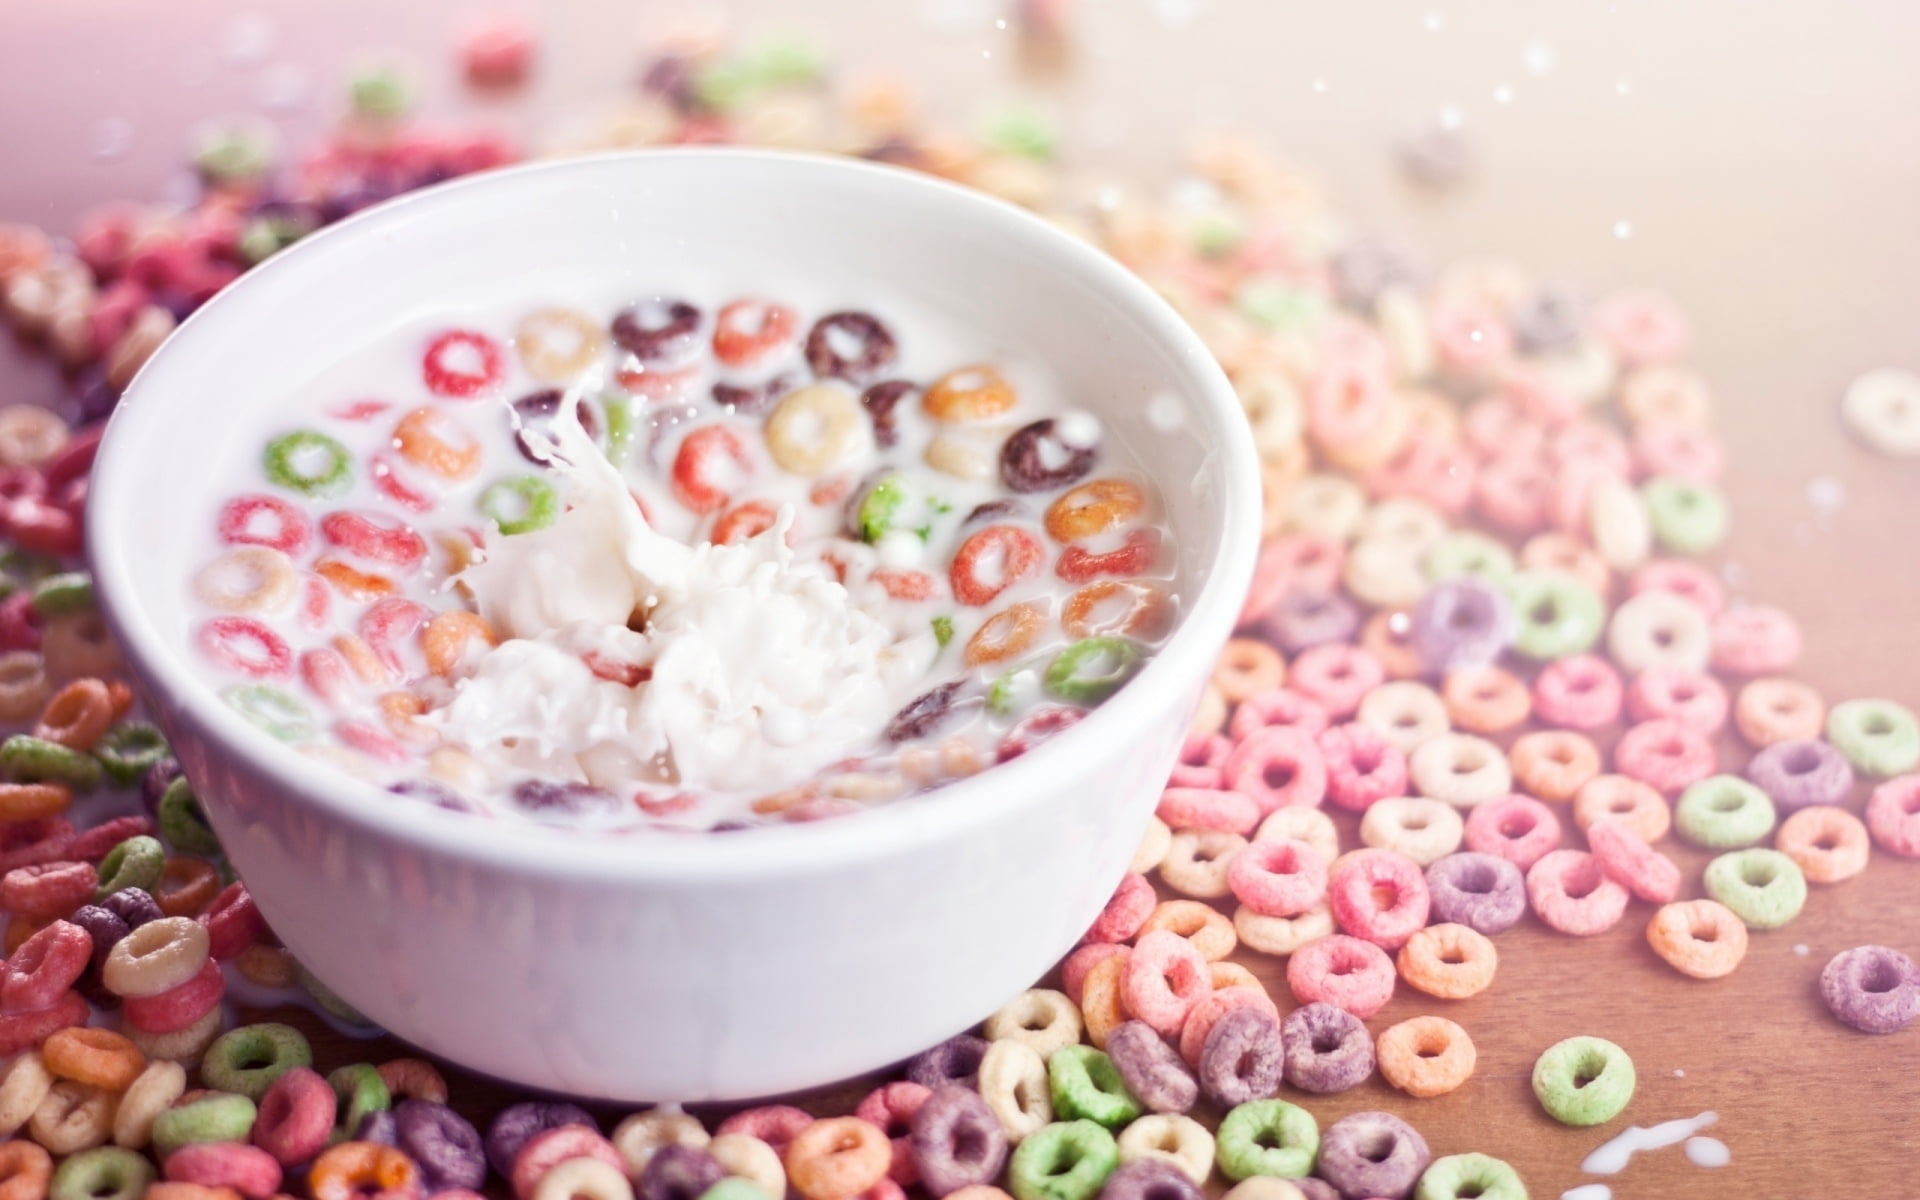 assorted color fruit loops cereal with milk and bowl